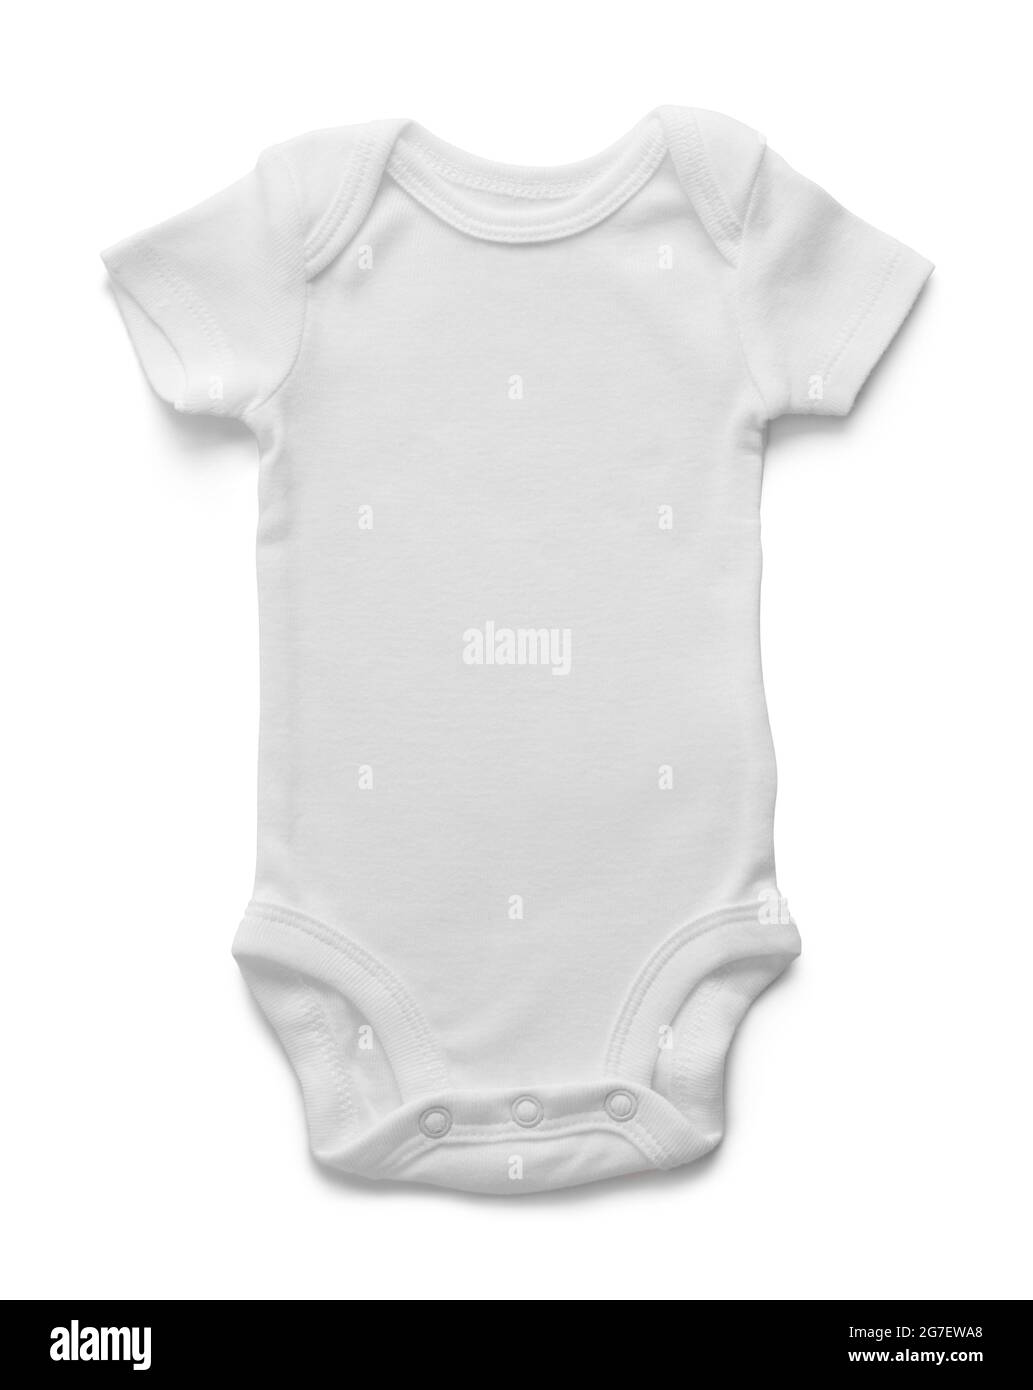 Infant Baby Onesie Outfit Cut Out On White. Stock Photo